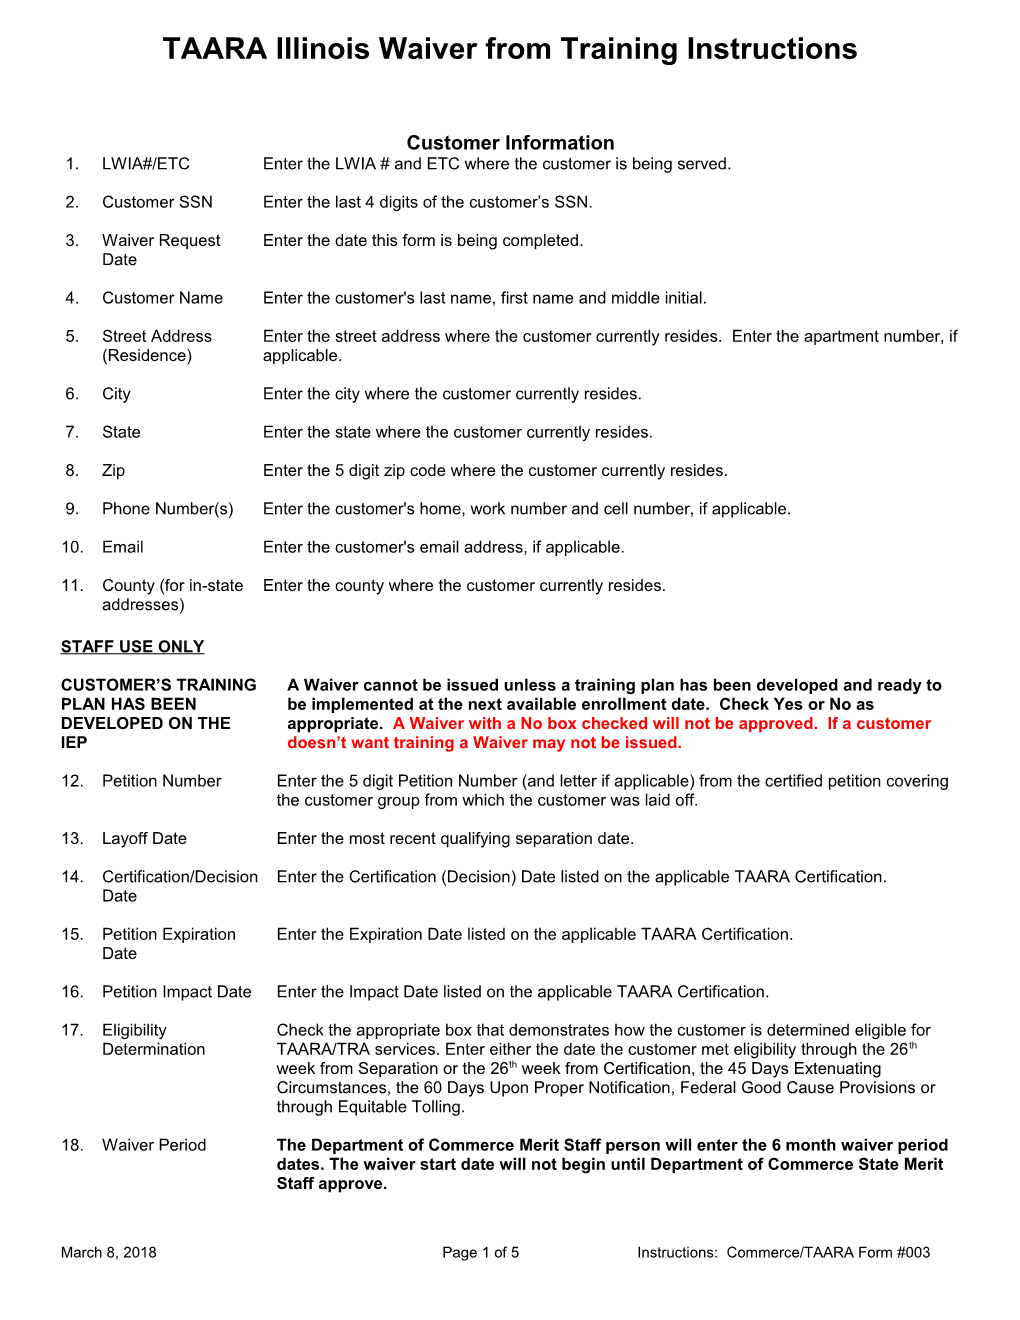 Form #003 2011 TAAEA Illinois Waiver from Training Instructions (MS Word) 1-06-12